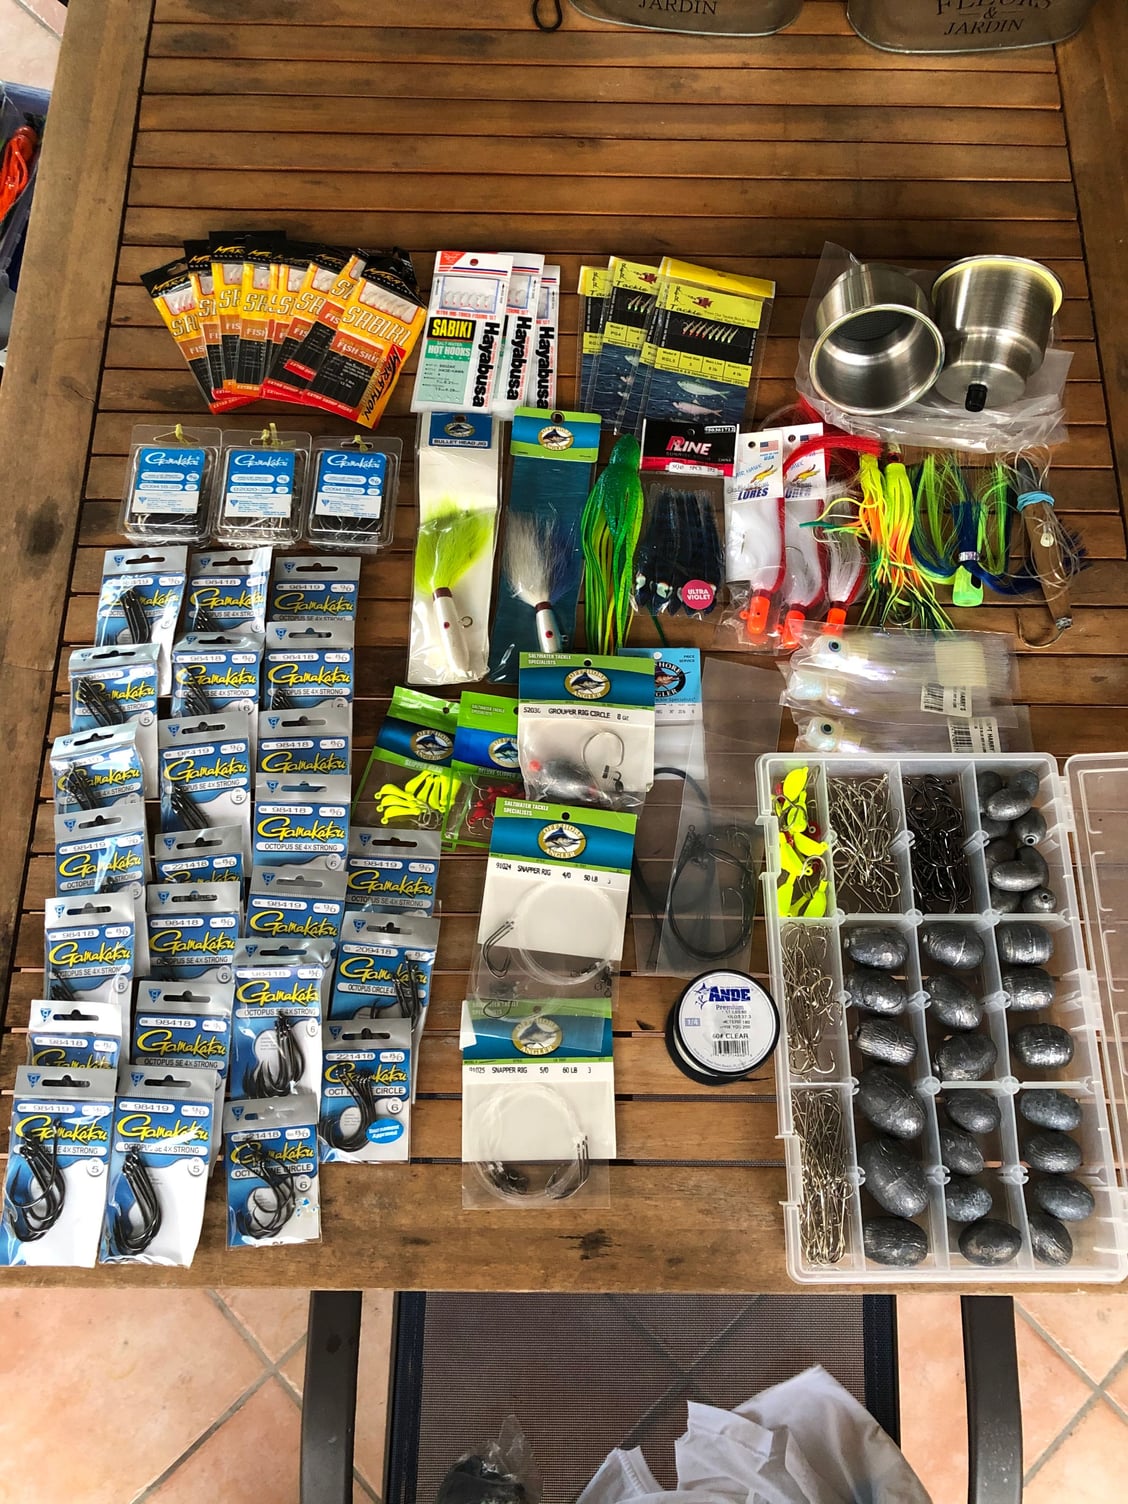 SOLD) Bulk Fishing Tackle for cheap (SOLD) - The Hull Truth